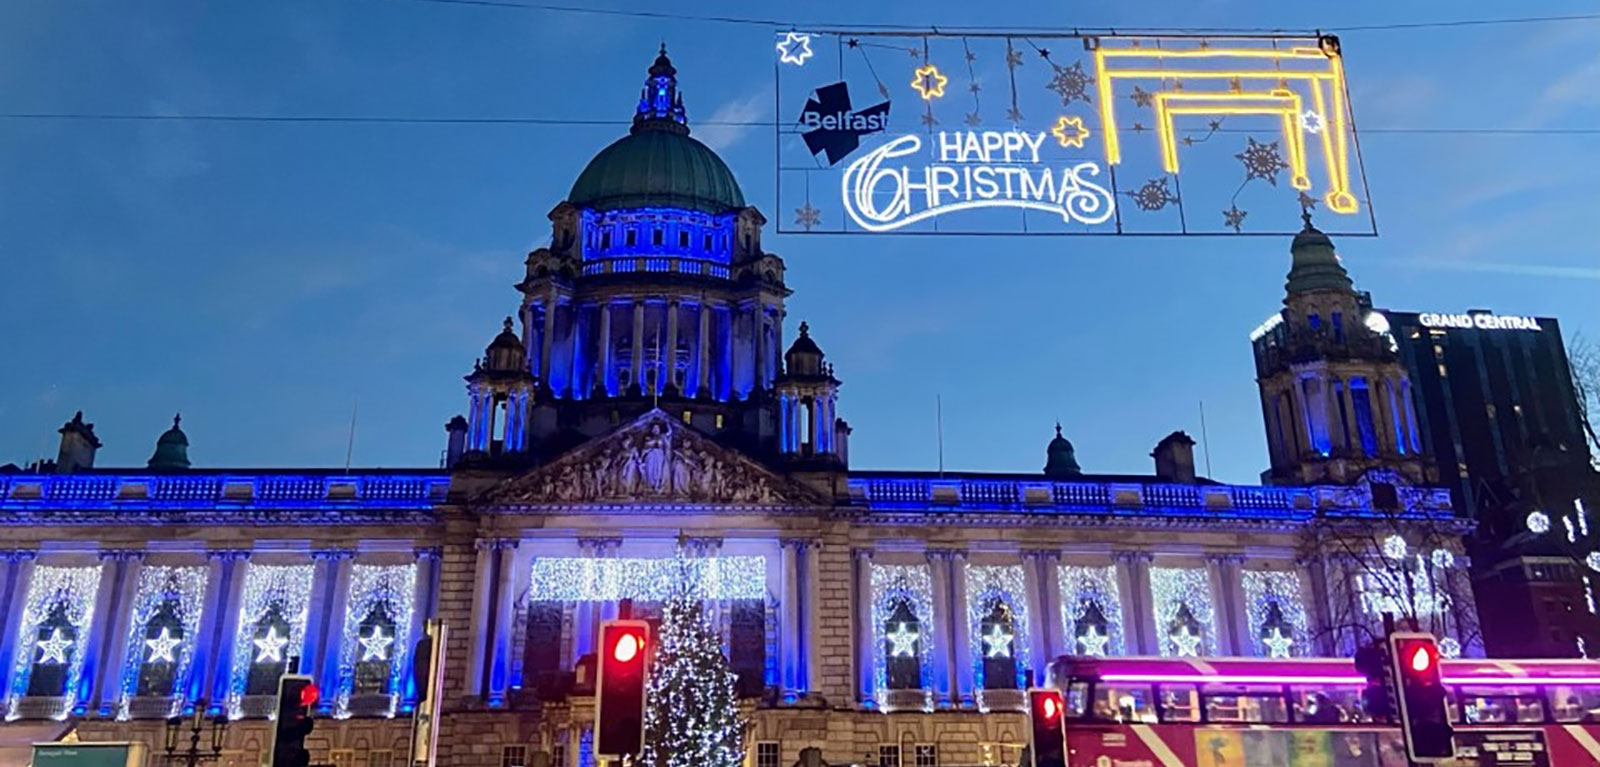 Christmas lights and decorations at City Hall Belfast